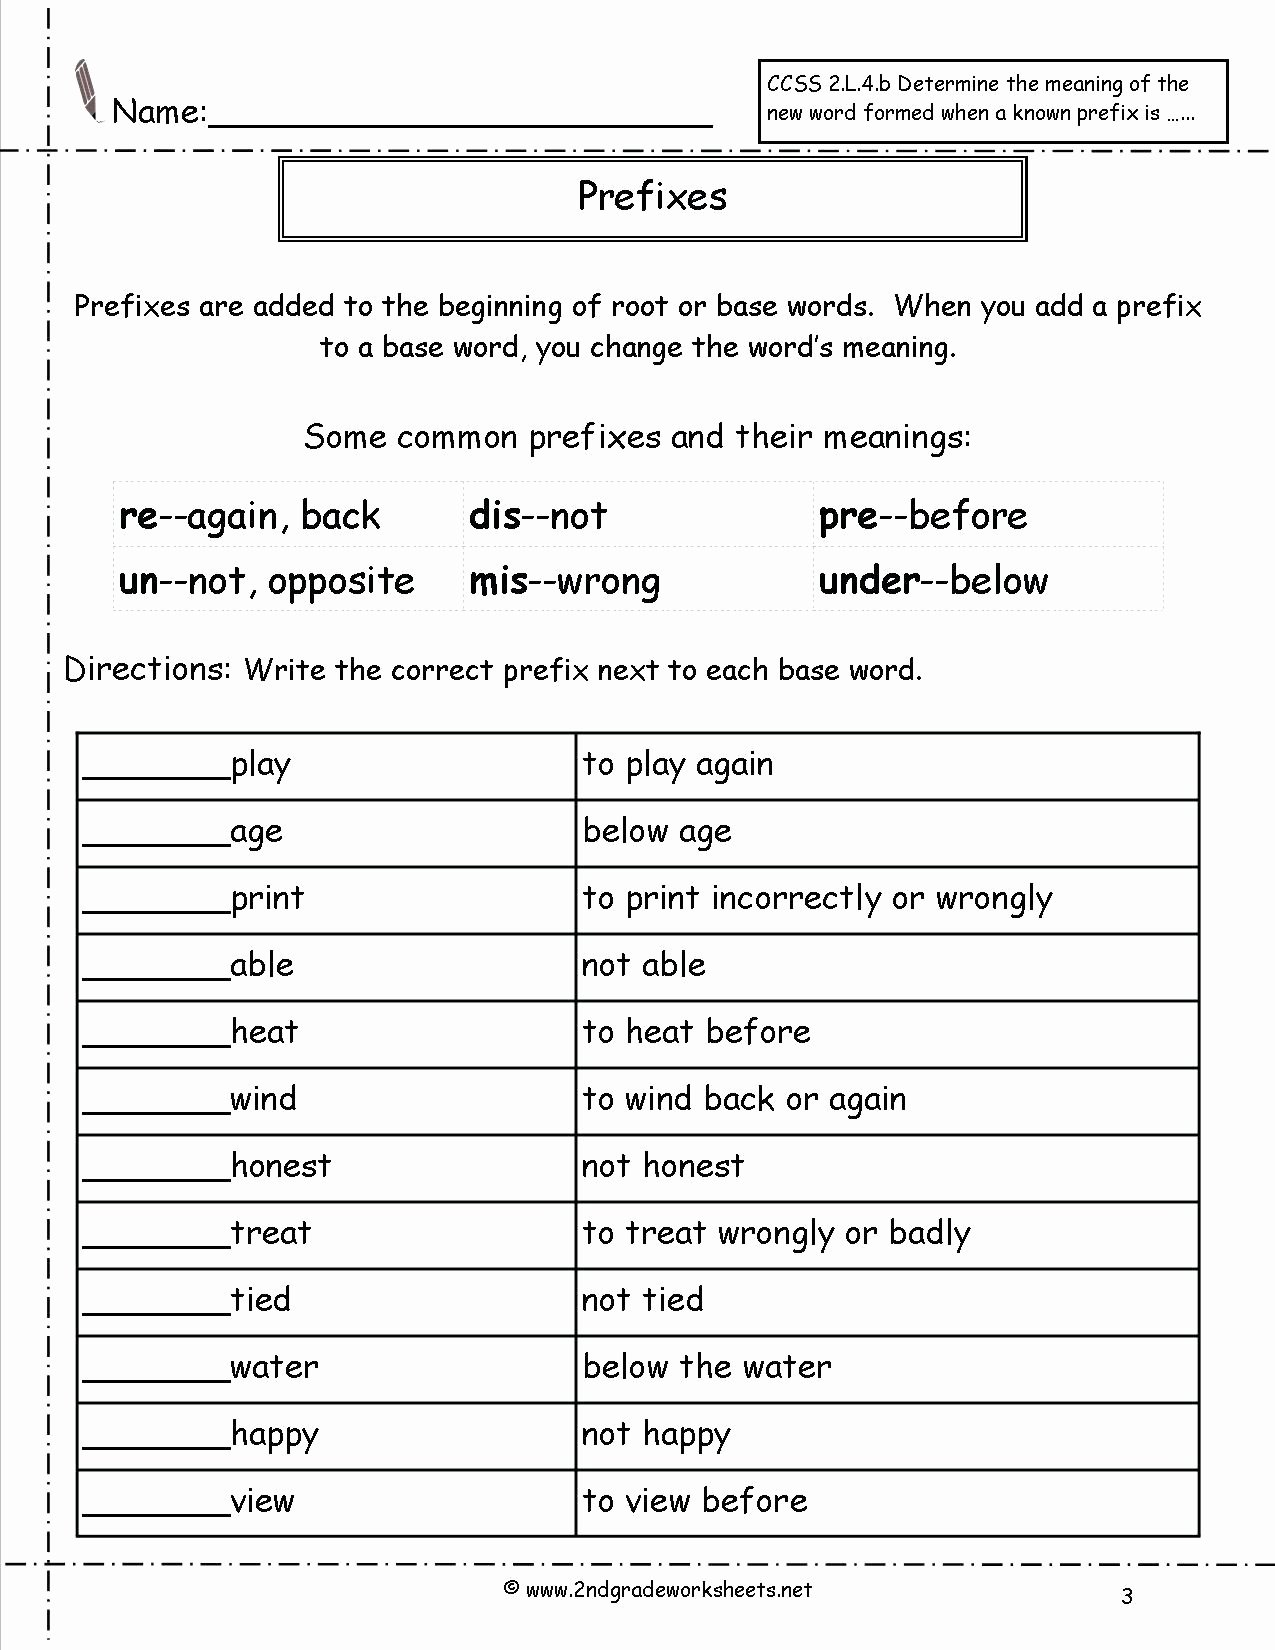 Medical Terminology Suffixes Worksheet New Medical Terminology Suffixes Worksheet Prefixes and Root